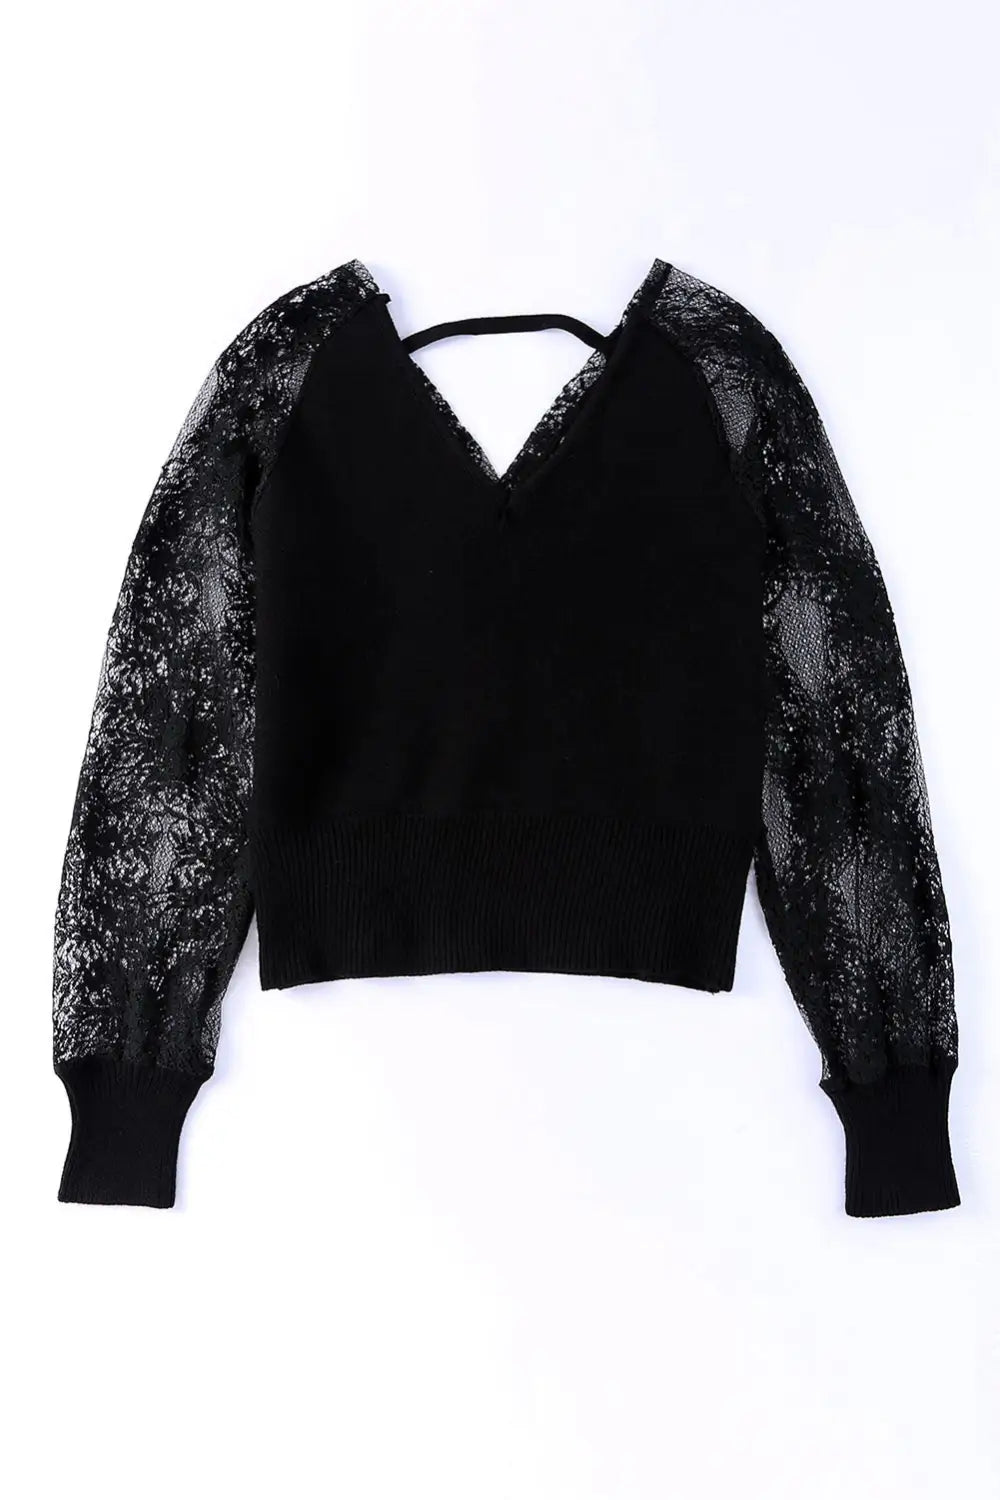 Black v-neck lace sleeve pullover sweater - sweaters & cardigans